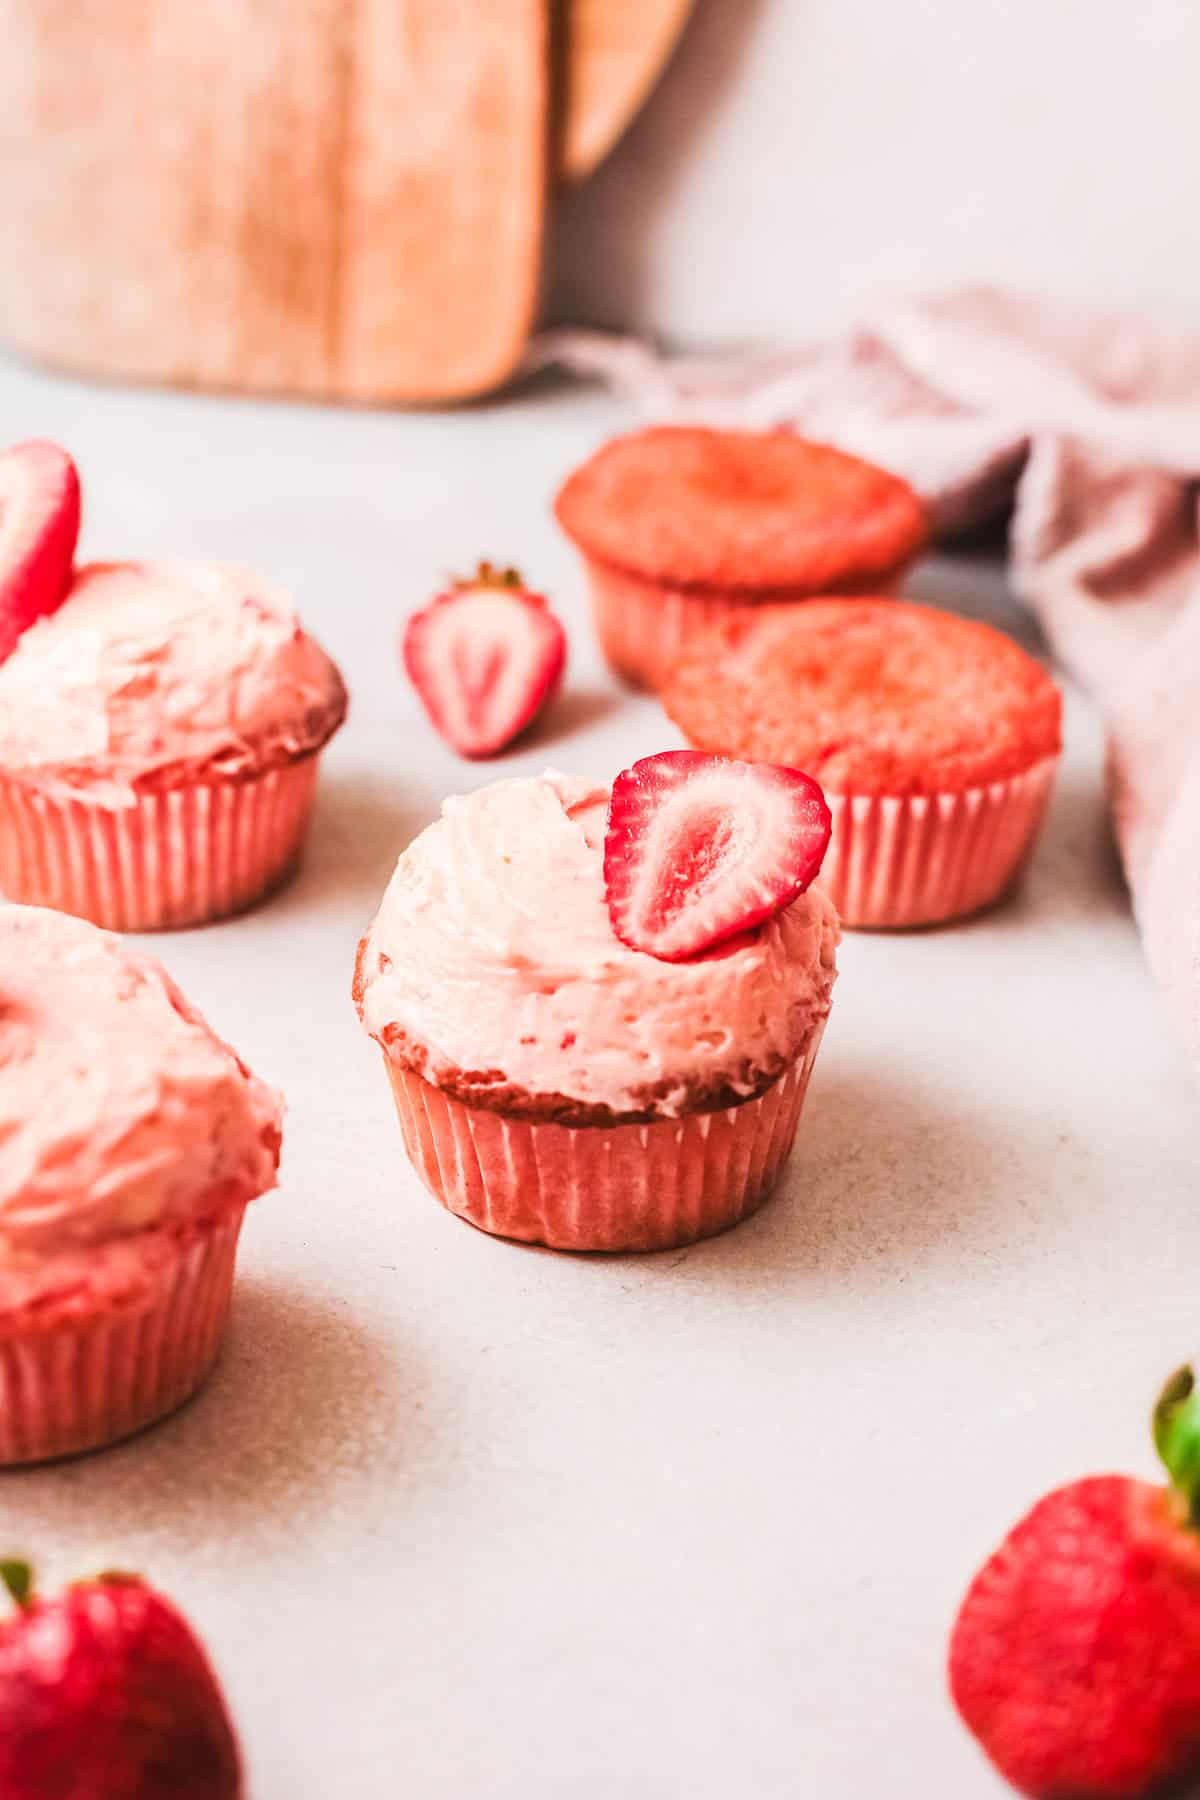 Strawberry cupcake frosted with sliced strawberry on top on white counter.